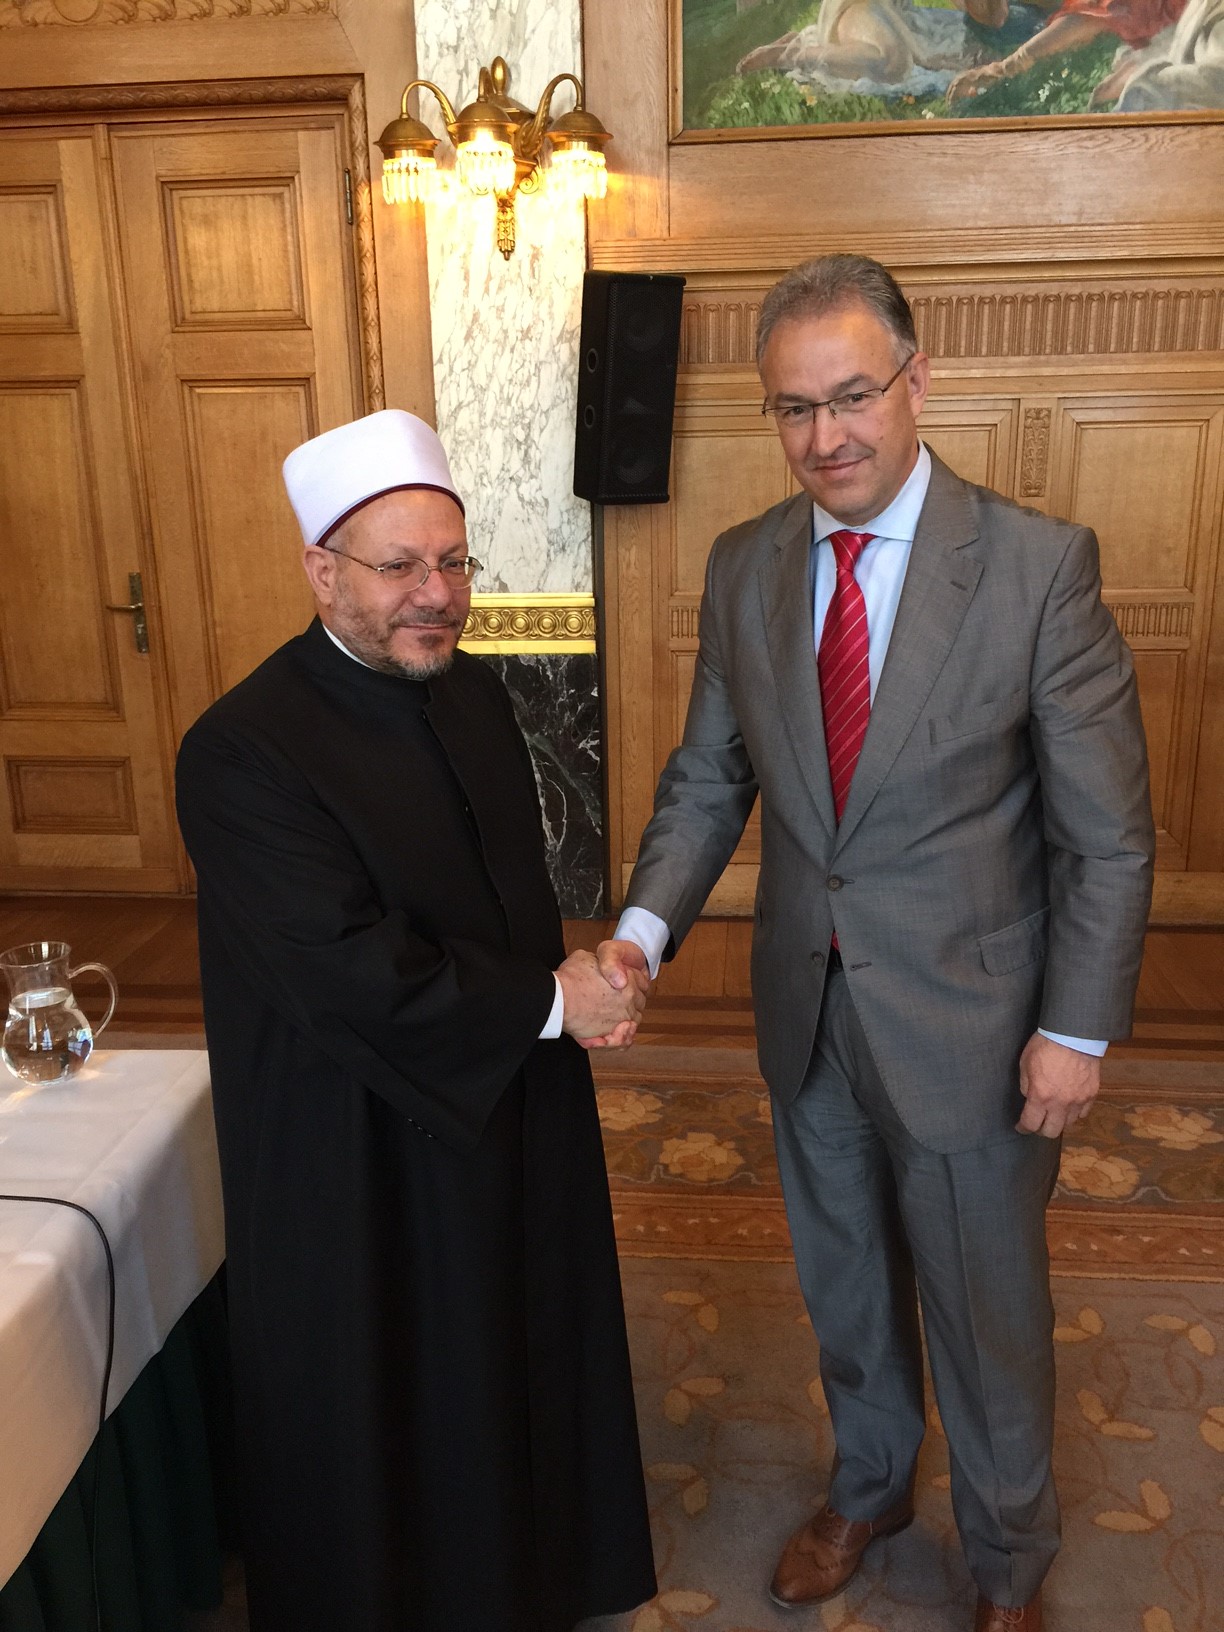 Grand Mufti to Rotterdam Mayor: Muslims do not seek separation from western societies but pursue integration and preservation of religious rights